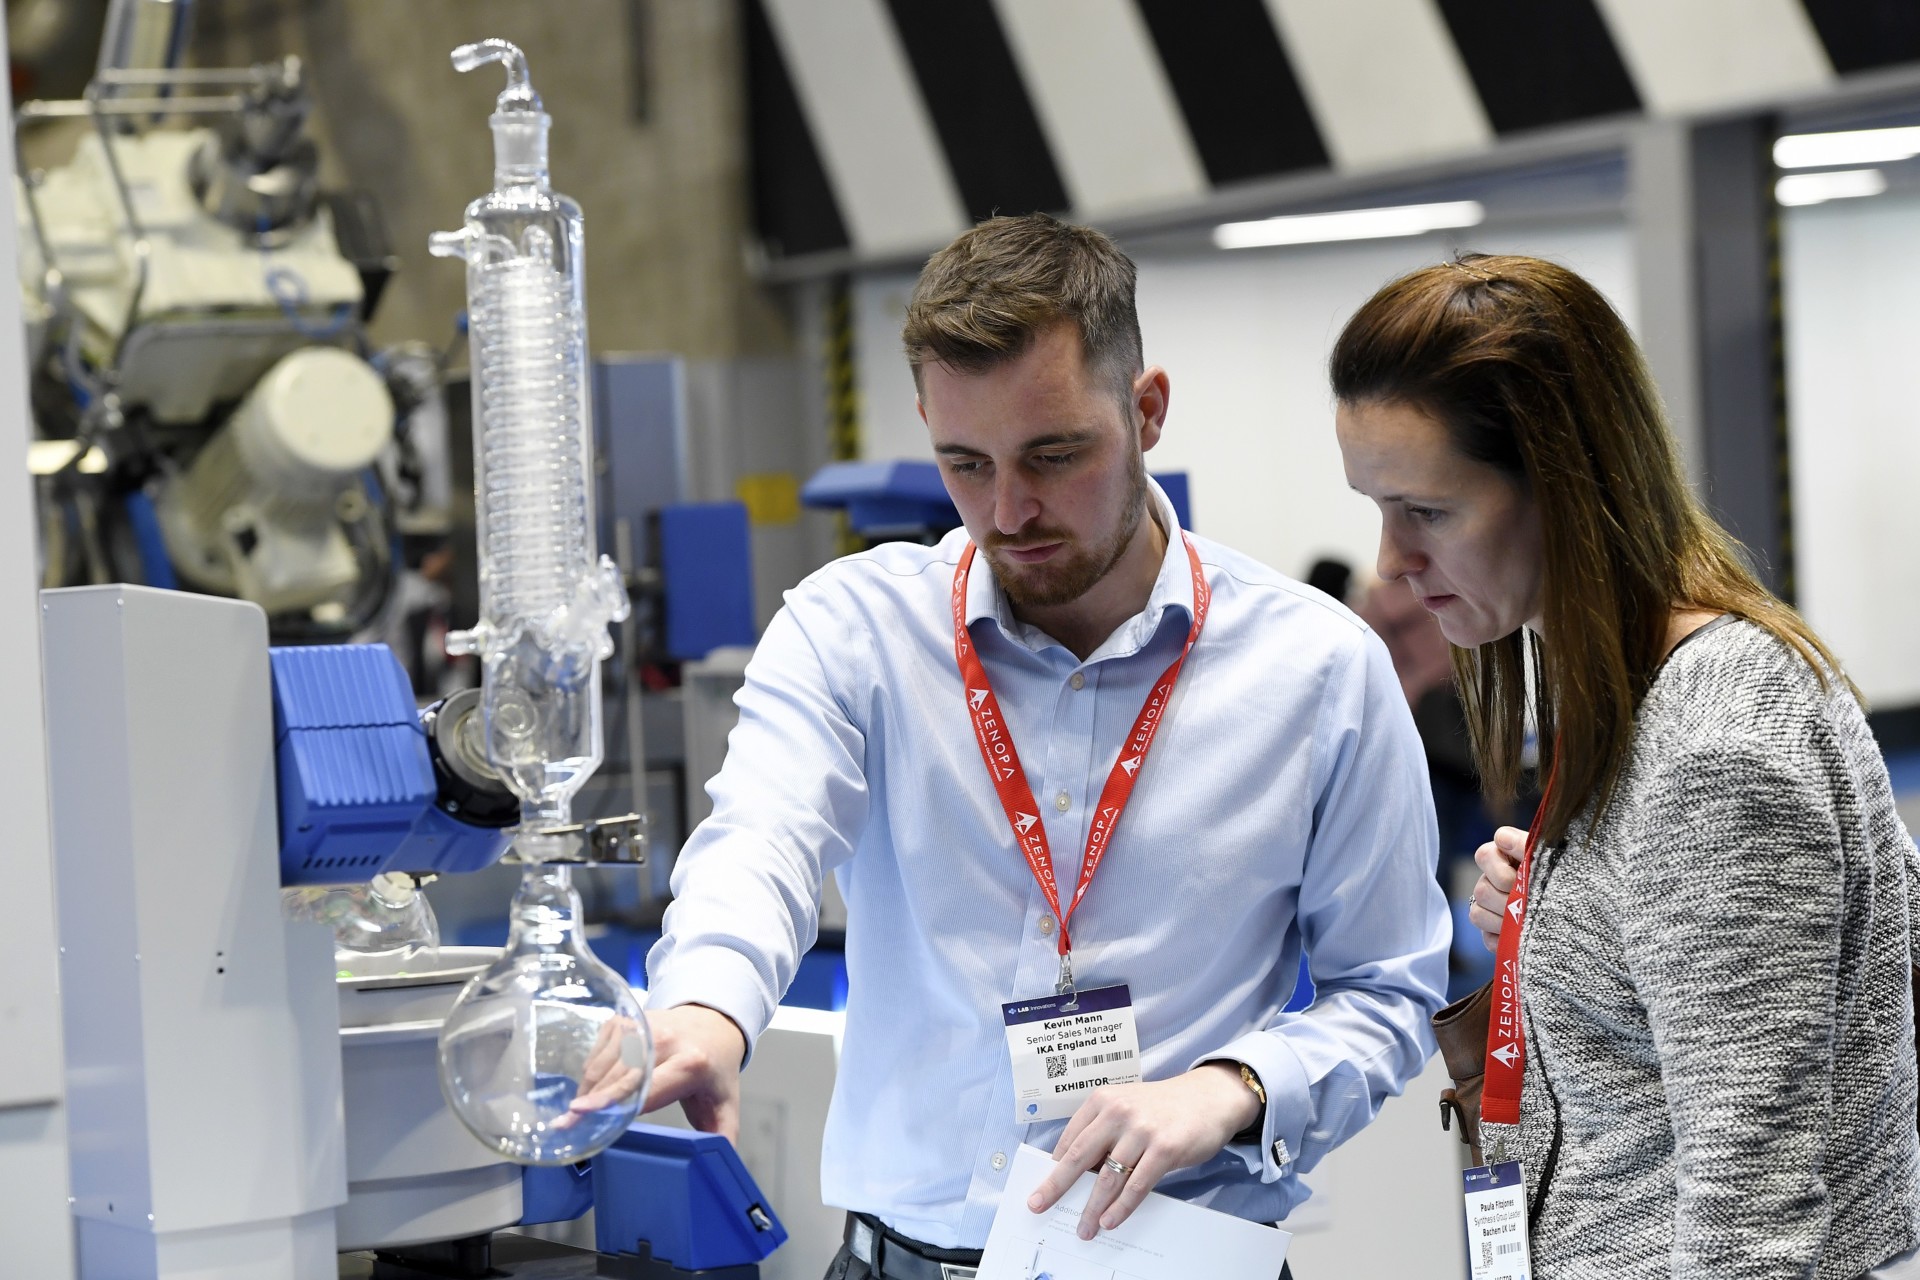 UK’s entire lab industry has its eyes on Lab Innovations 2020